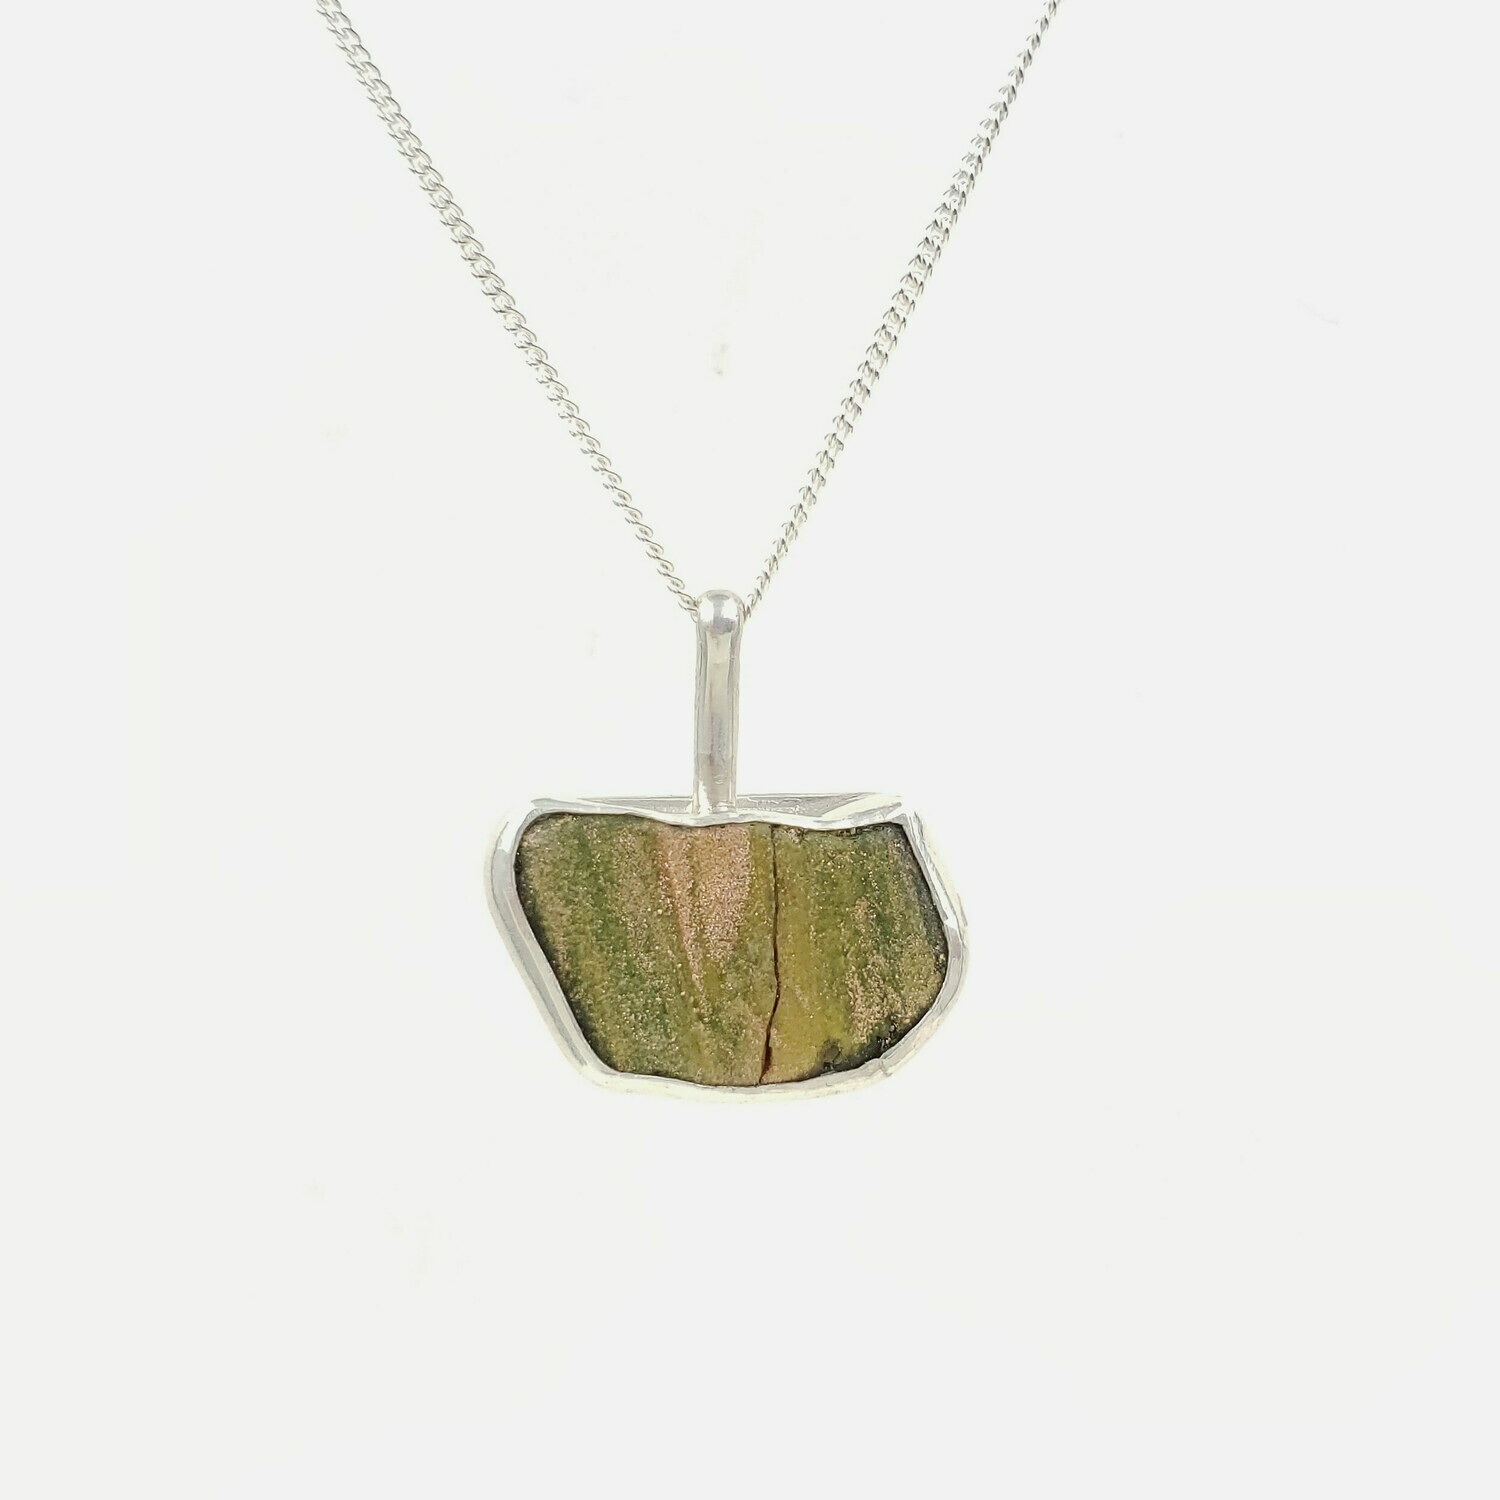 Green and Gold Lake Erie Beach Glass Tile Necklace Bezel Set in Sterling Silver